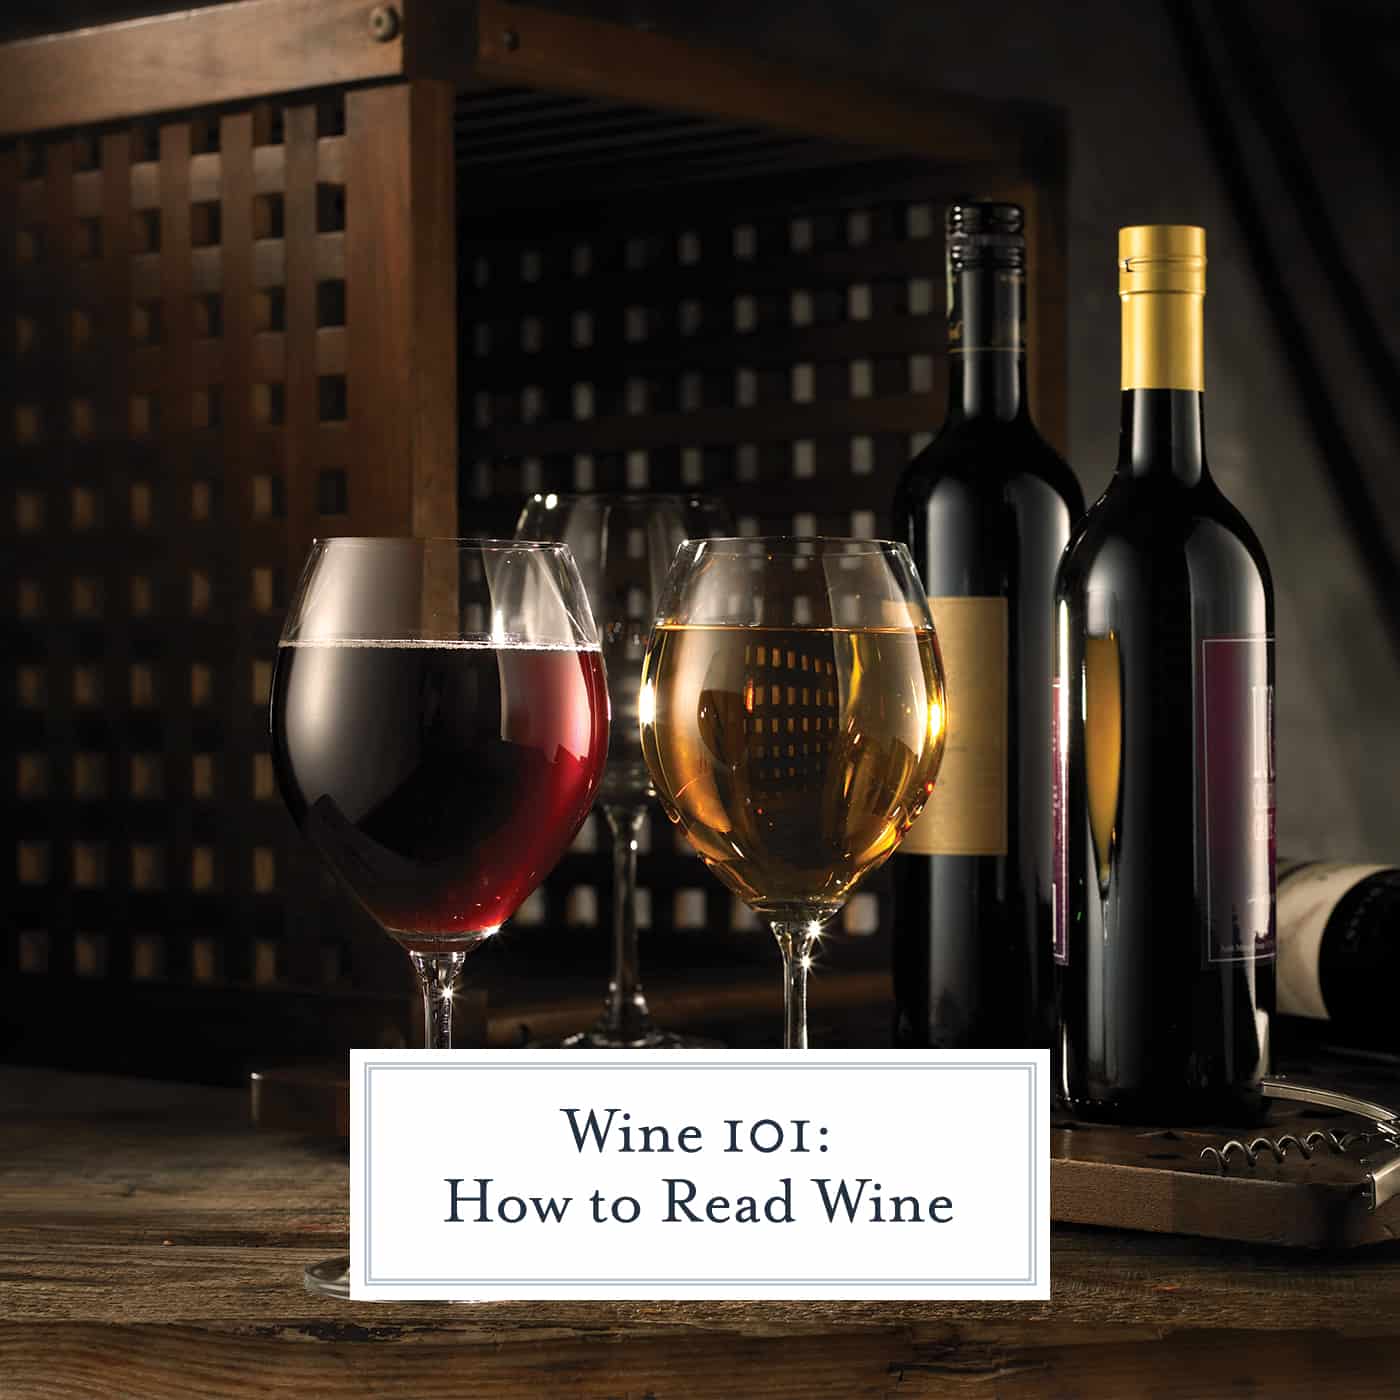 Learn how to read wine and execute a few party tricks to make you sound like a wine expert (even if you don't know much)! #howtoreadwine www.savoryexperiments.com